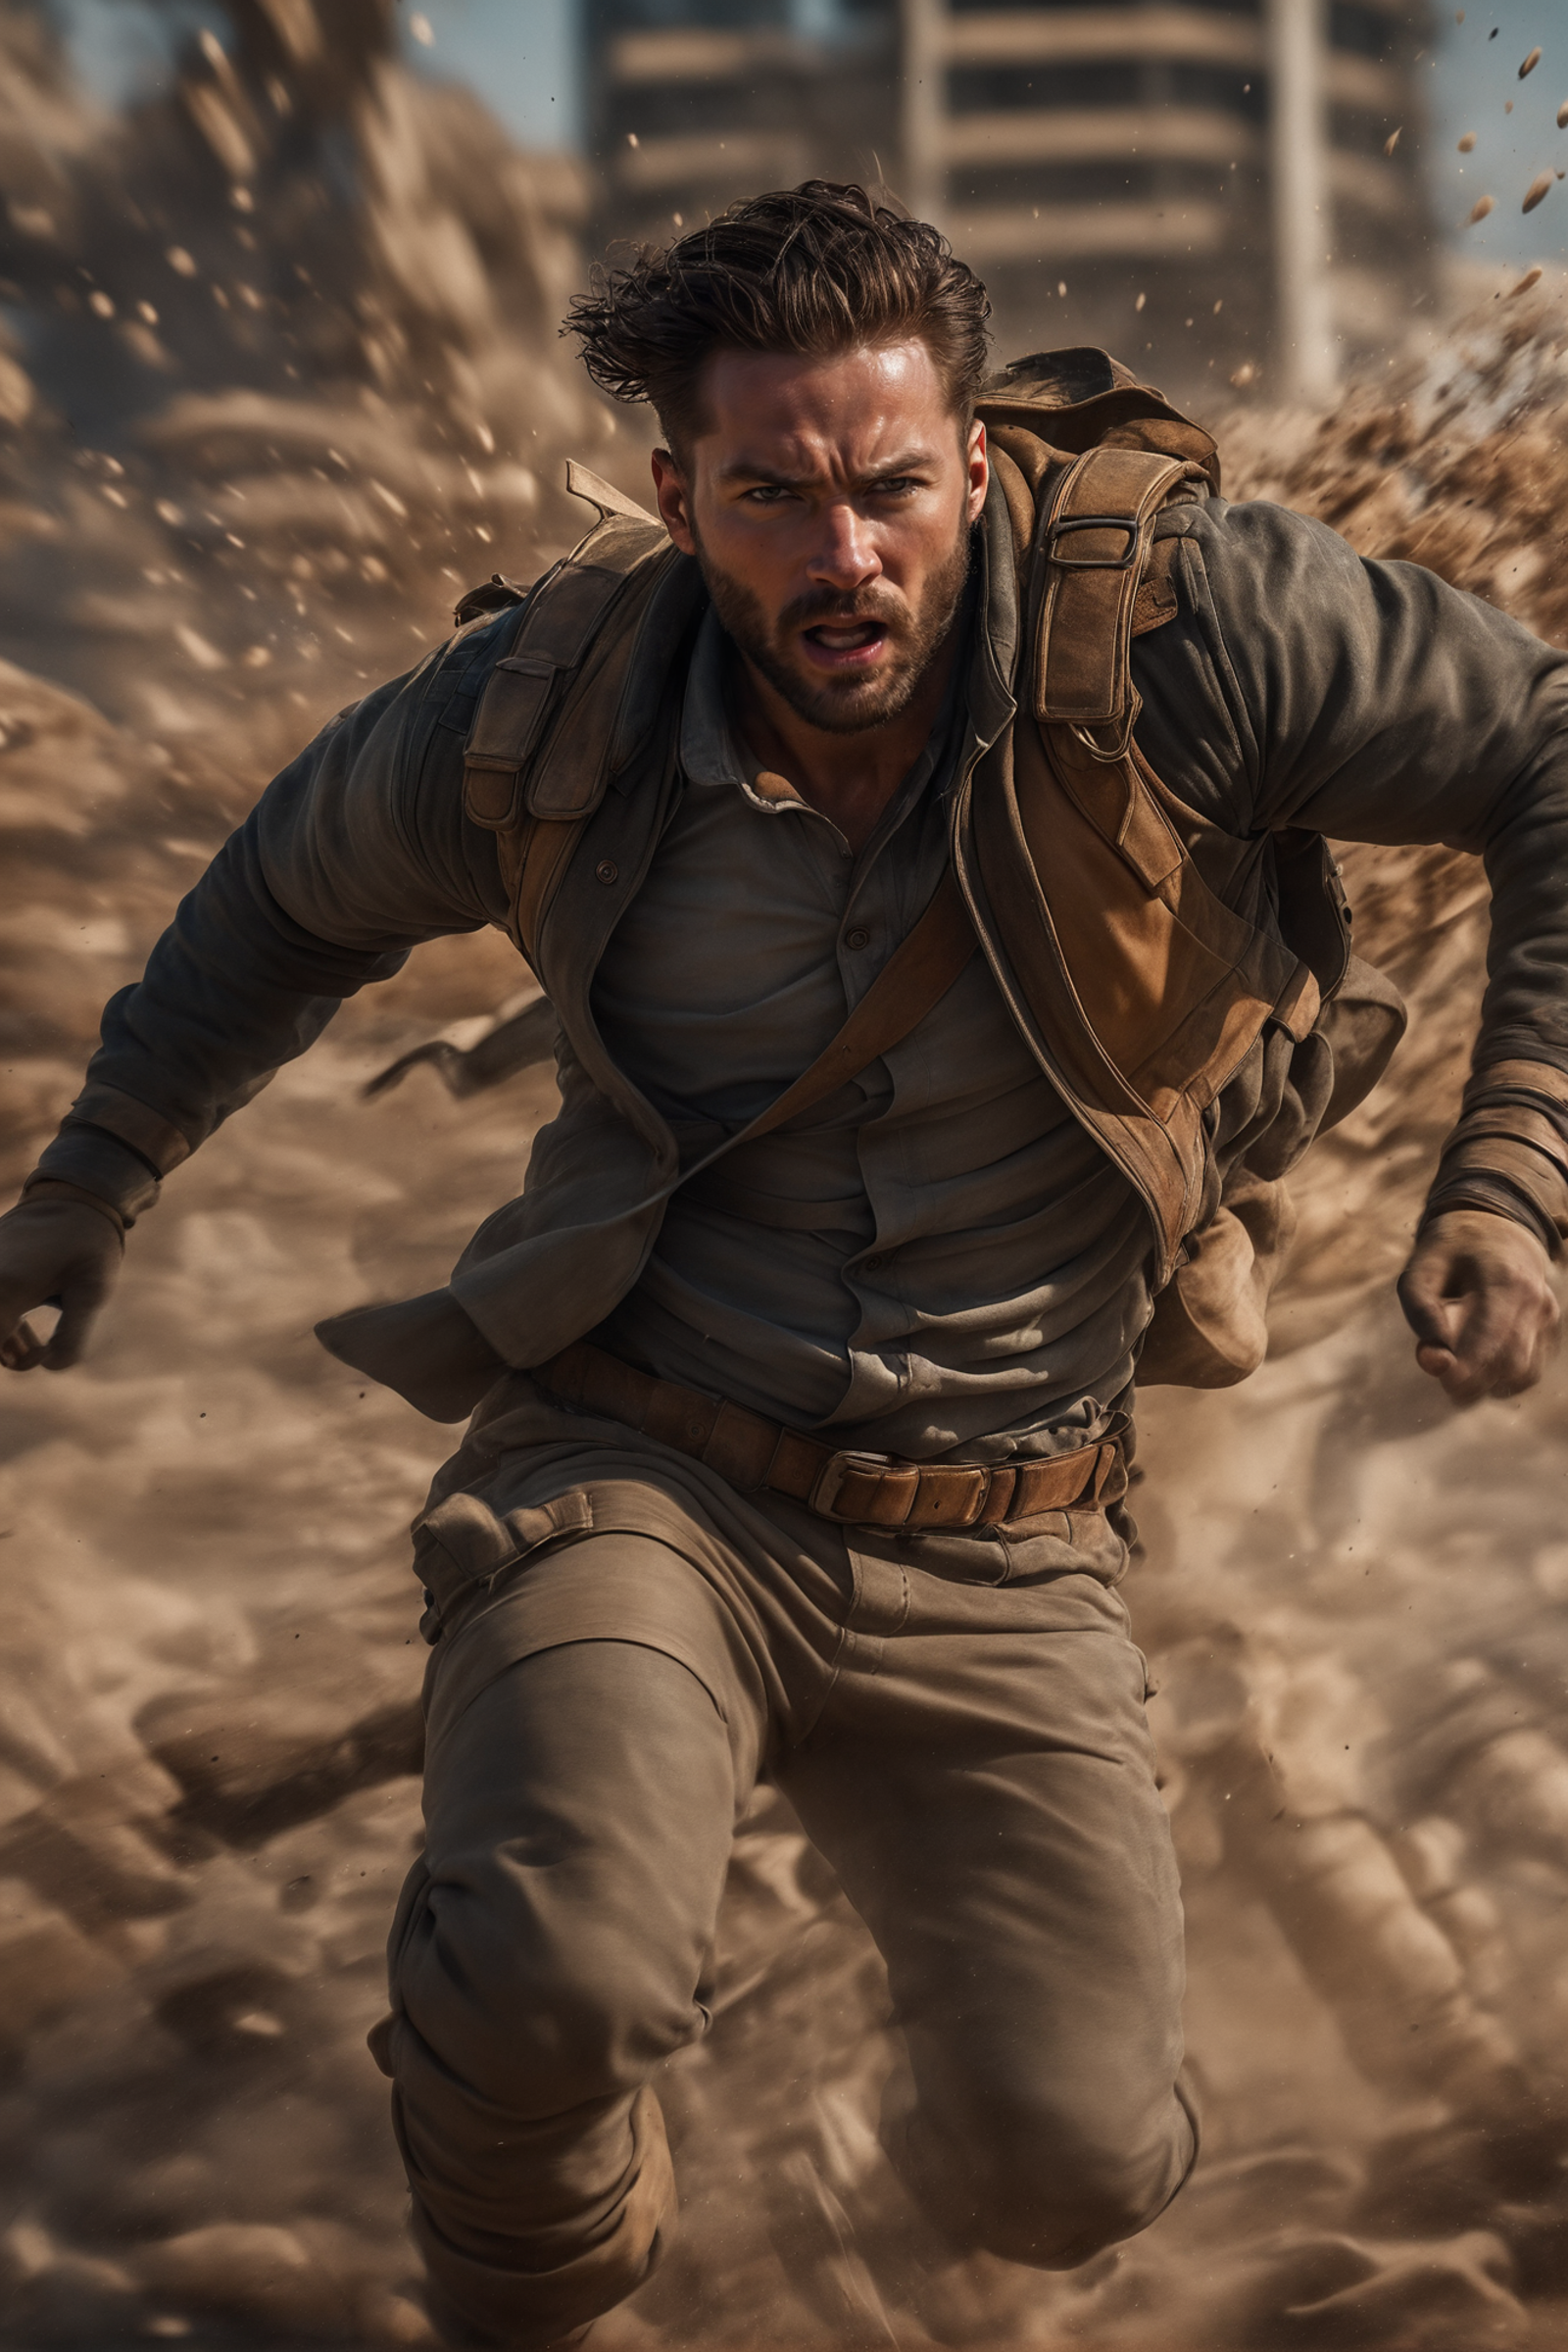 A man wearing a backpack and a belt running through sand.